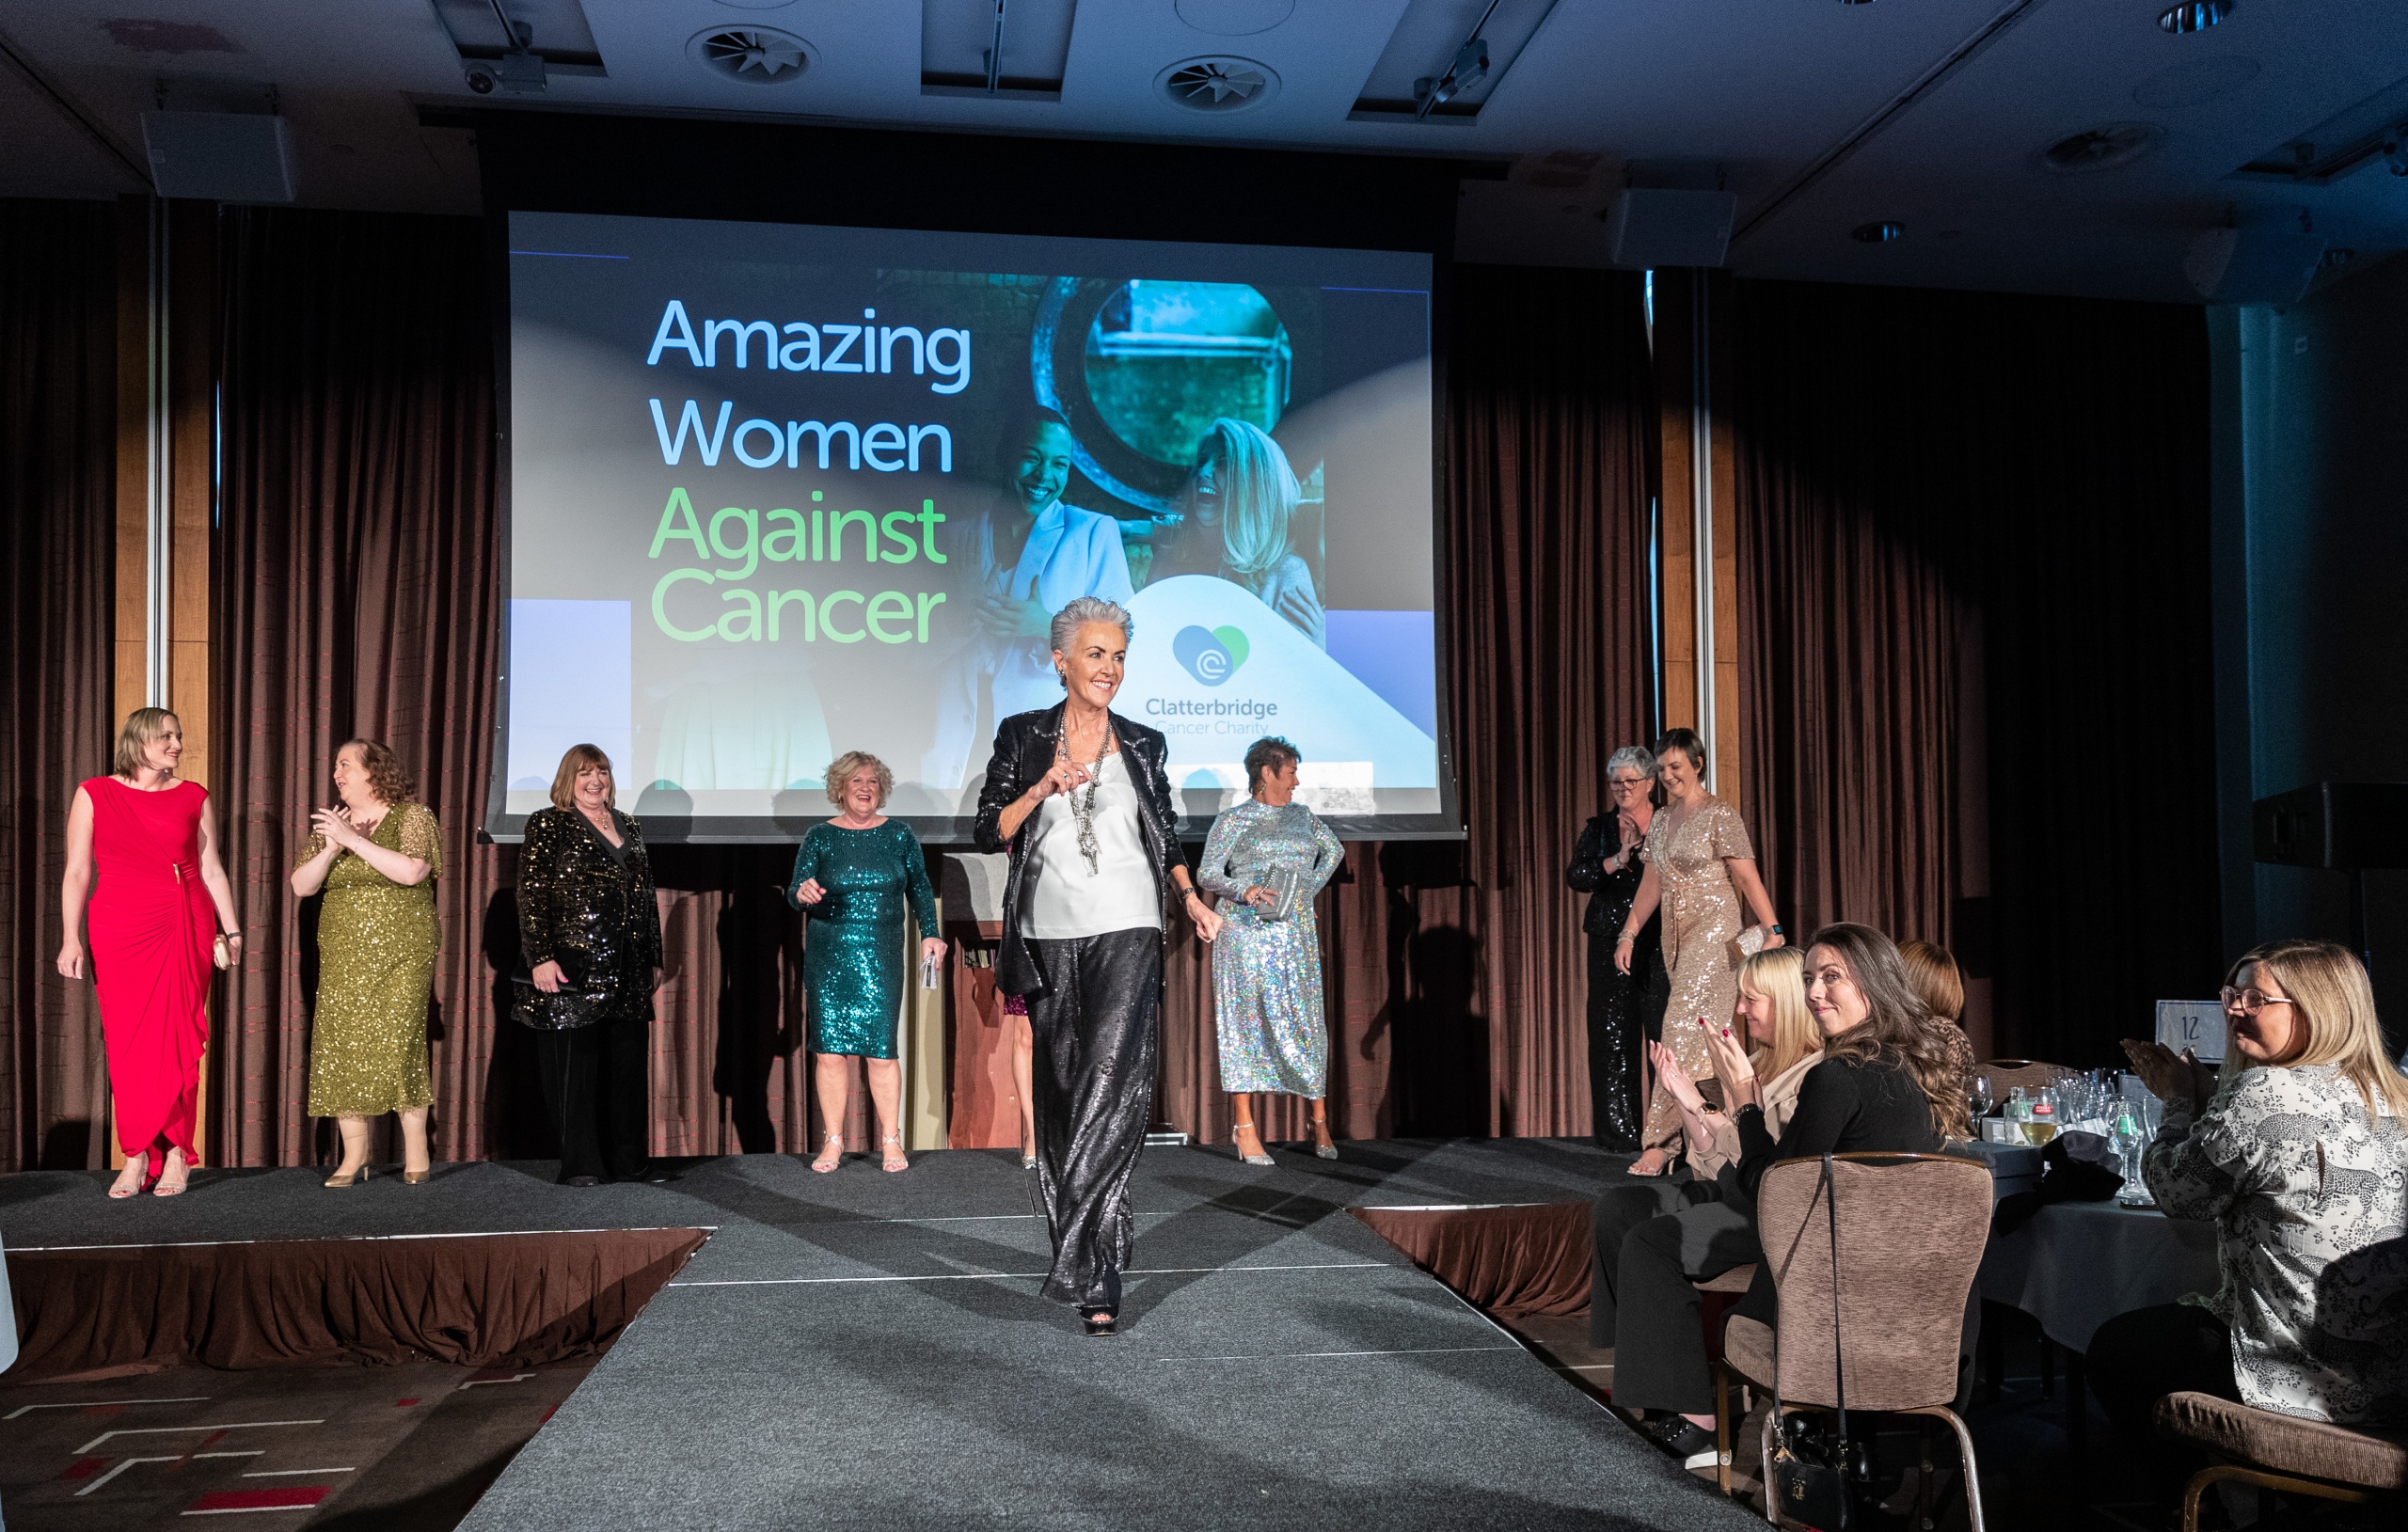 Women on the catwalk at the Charity's amazing women against cancer event in November 2022